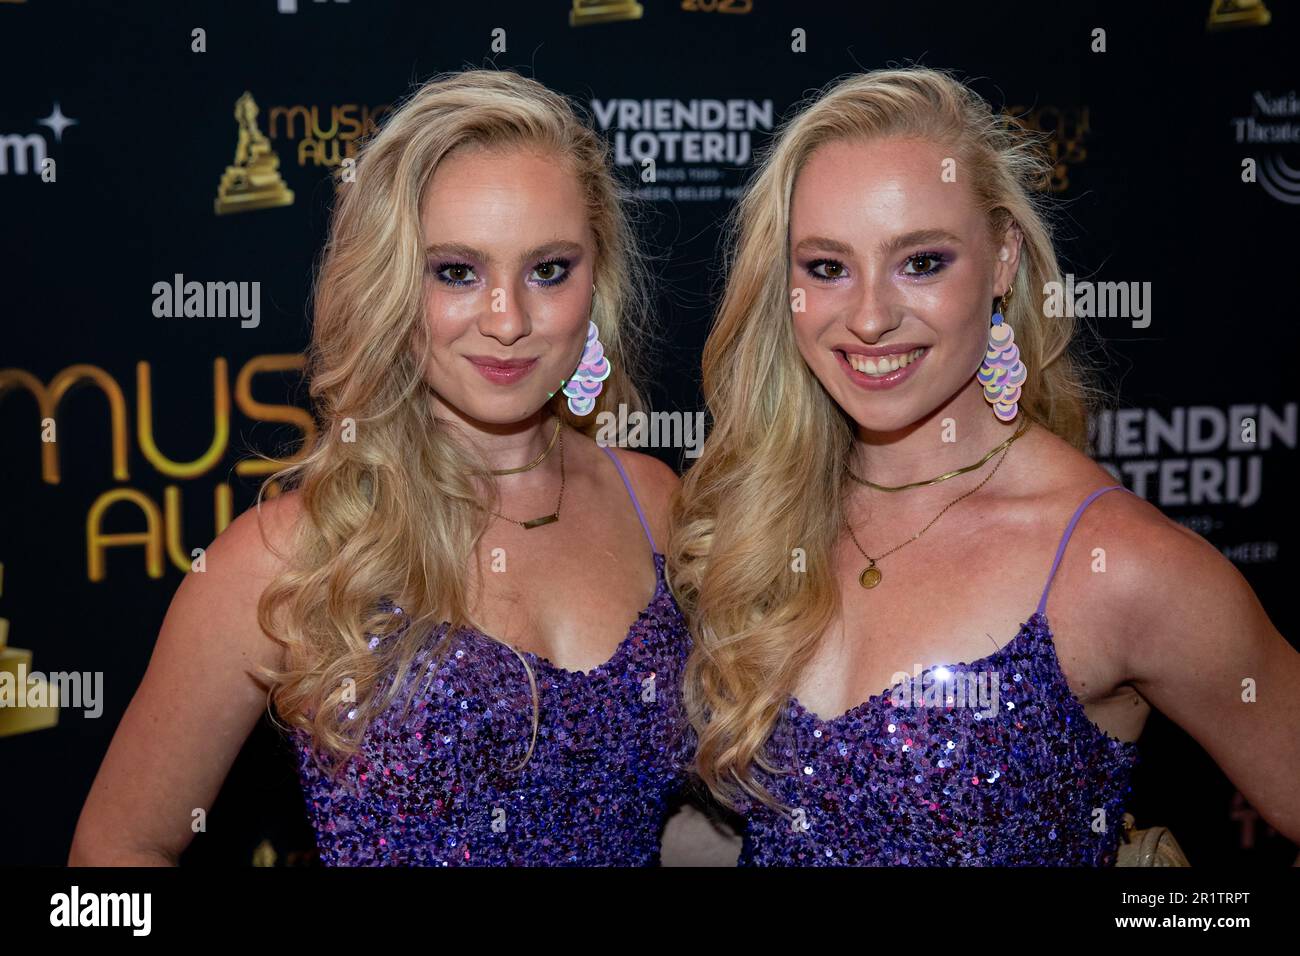 SCHEVENINGEN - Mylène and Rosanne Waalewijn on the red carpet, prior to the  Musical Awards Gala in the AFAS Circustheater. Prizes will be awarded in  various categories during the gala. There is